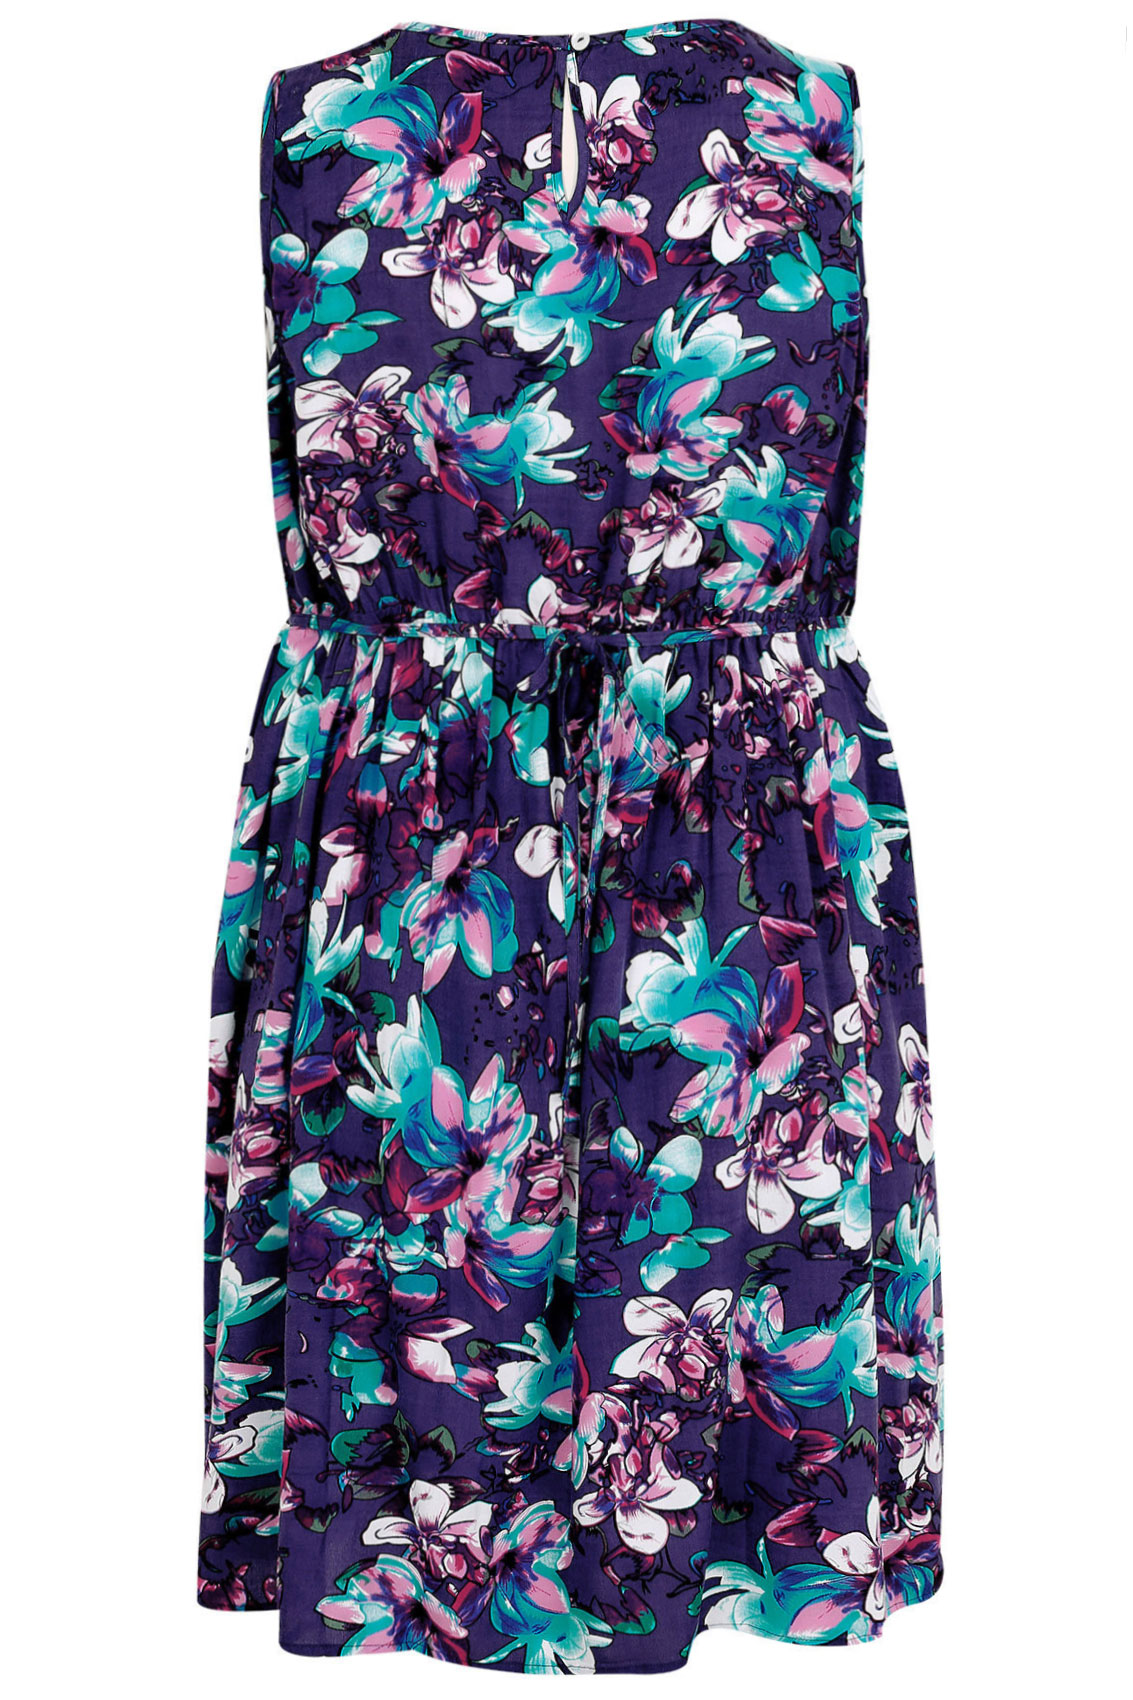 Purple & Blue Floral Pocket Dress With Elasticated Waistband, Plus size ...